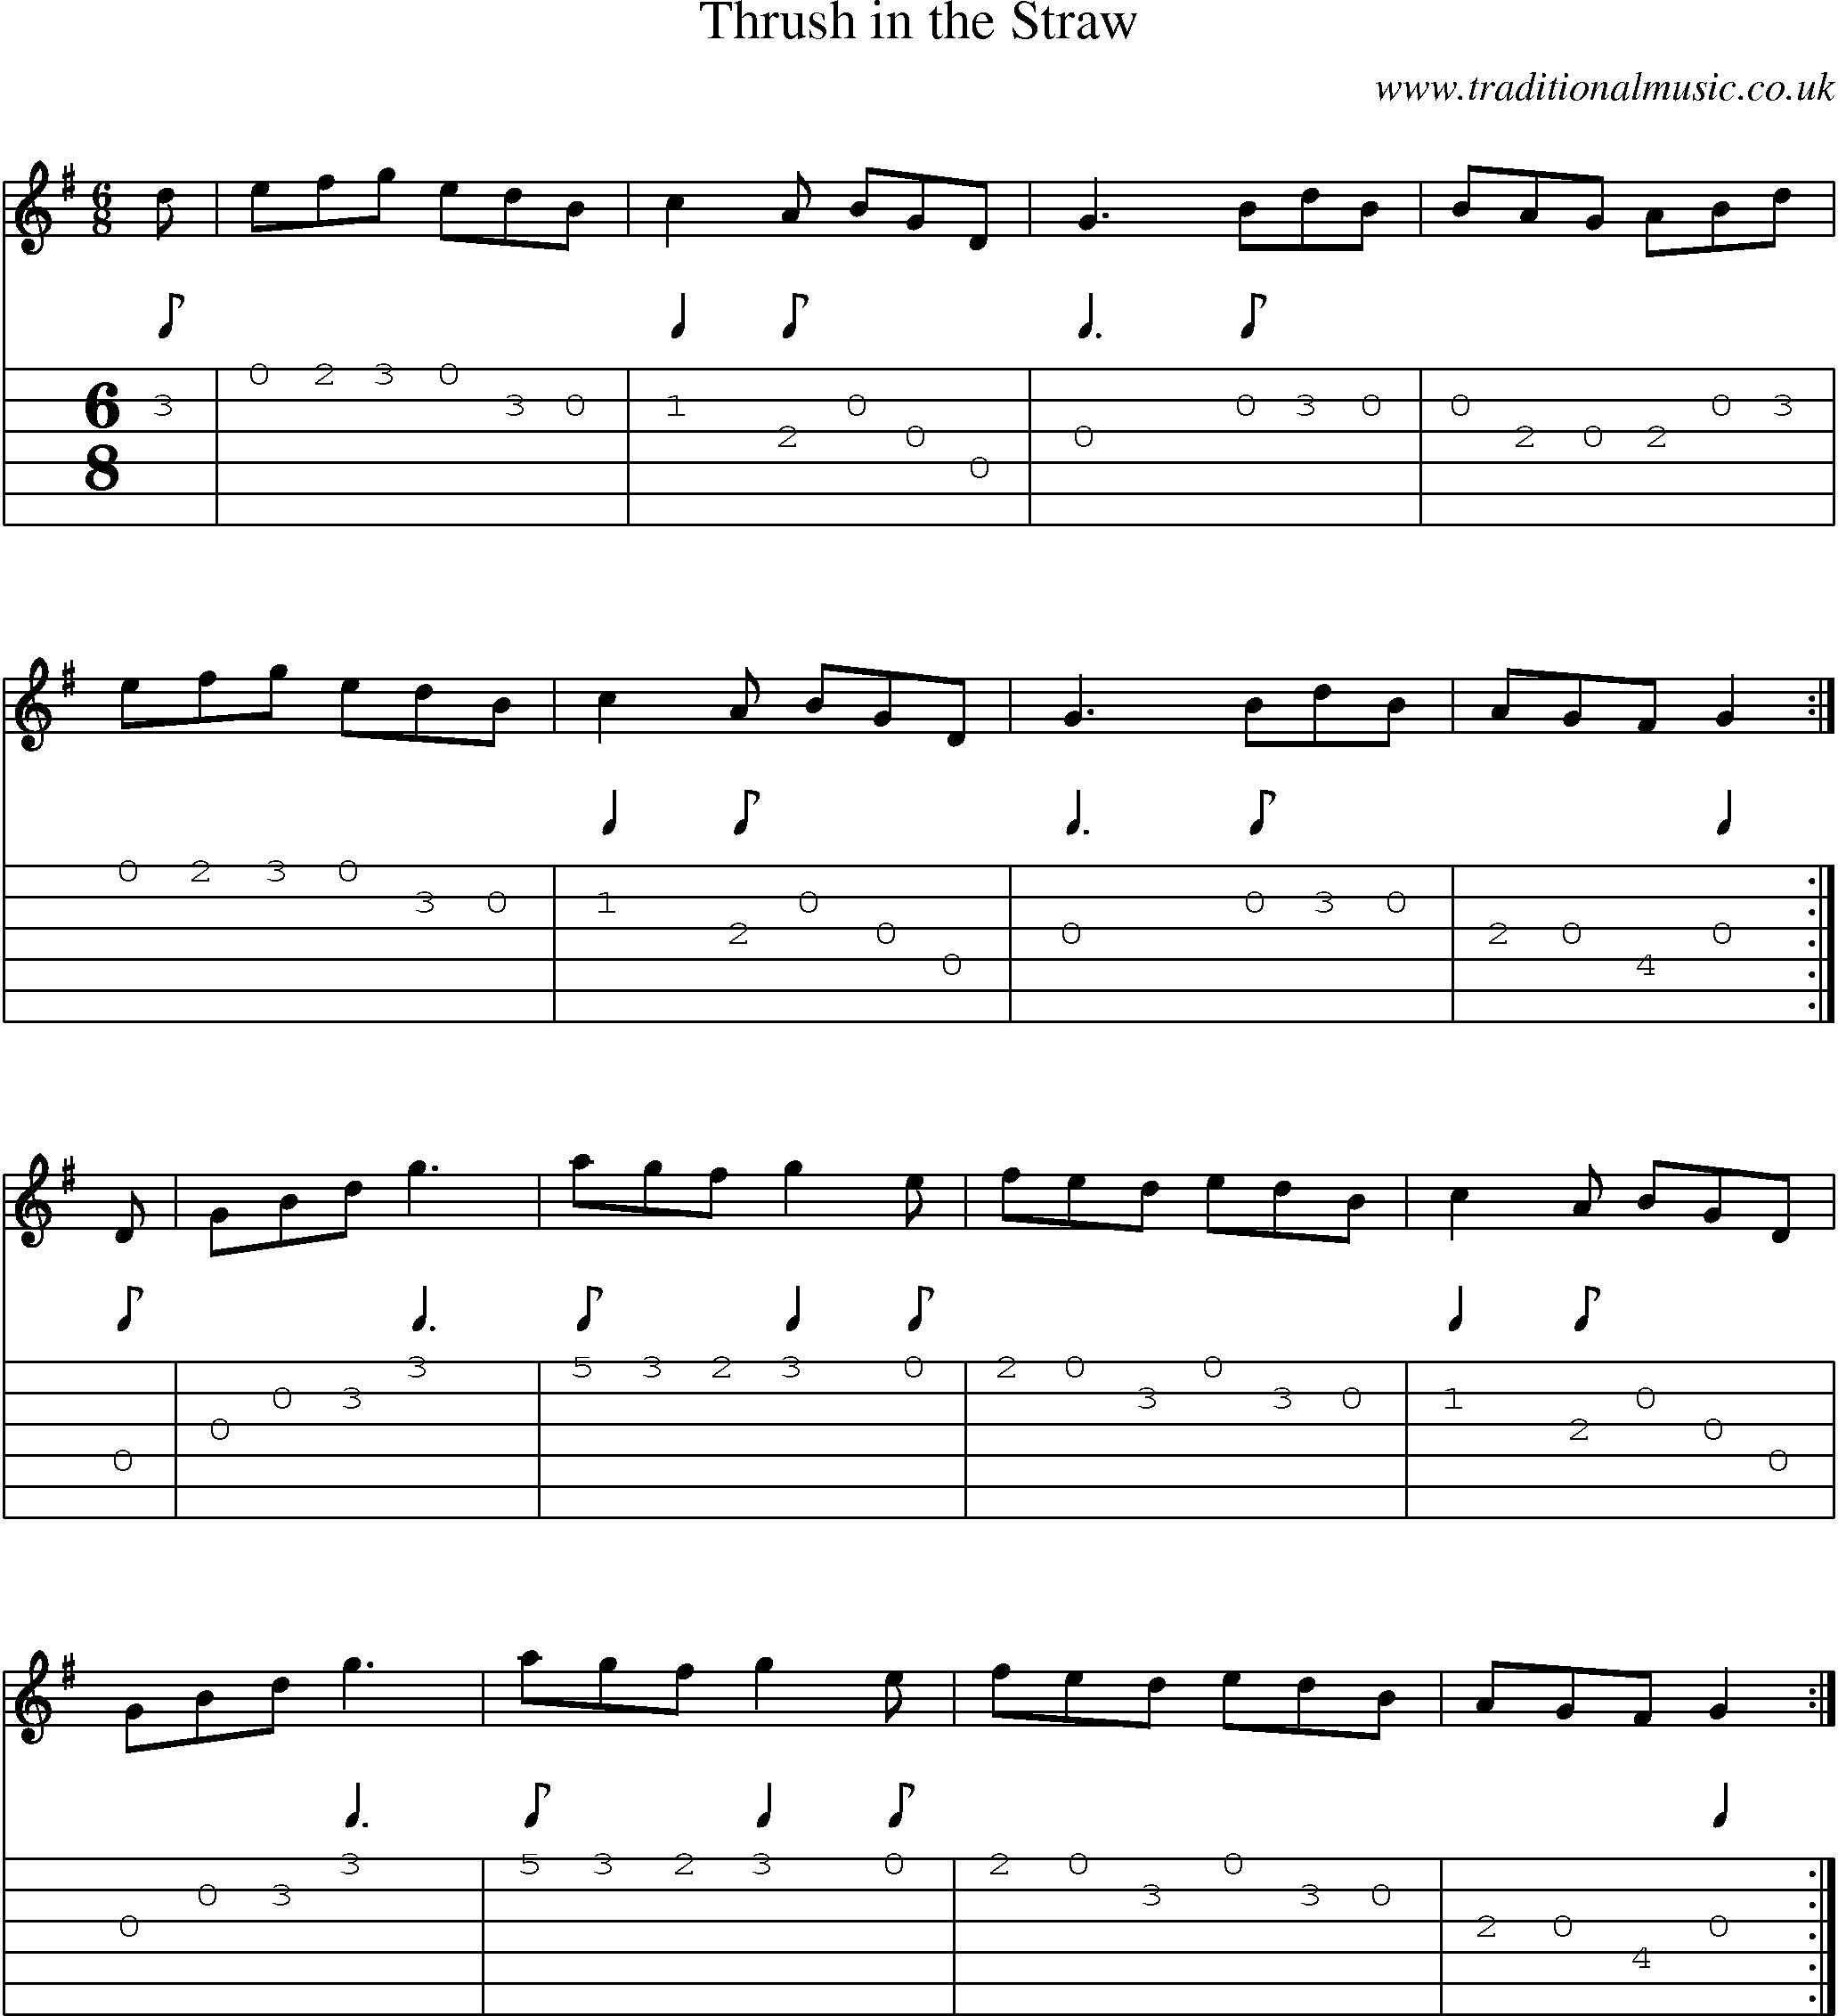 Music Score and Guitar Tabs for Thrush In Straw